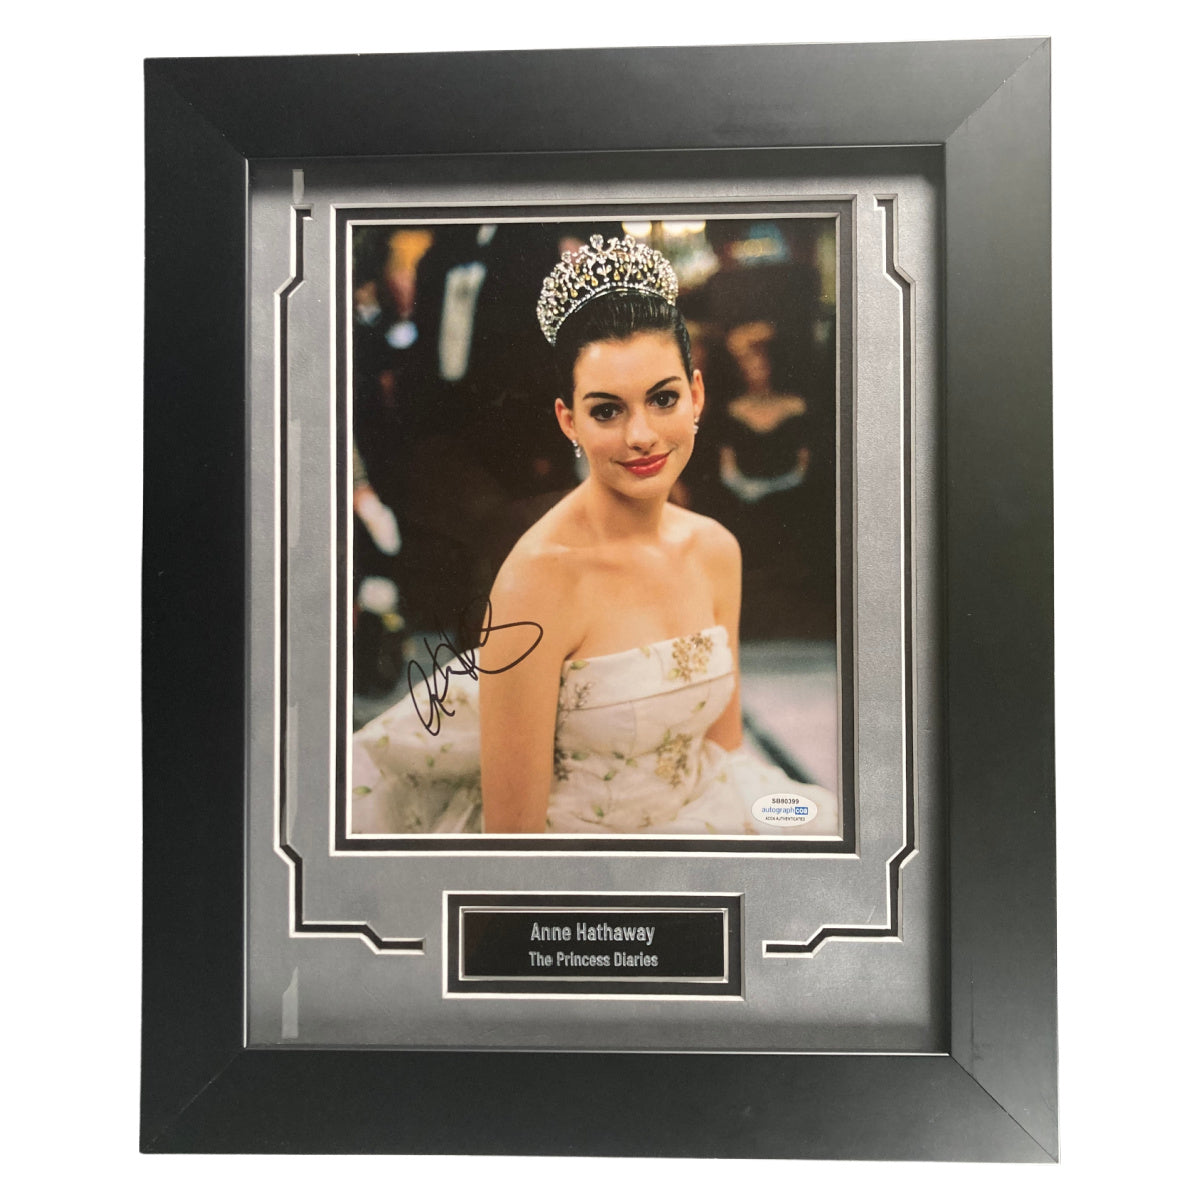 Anne Hathaway Signed 8x10 Photo The Princess Diaries Framed Autographed ACOA